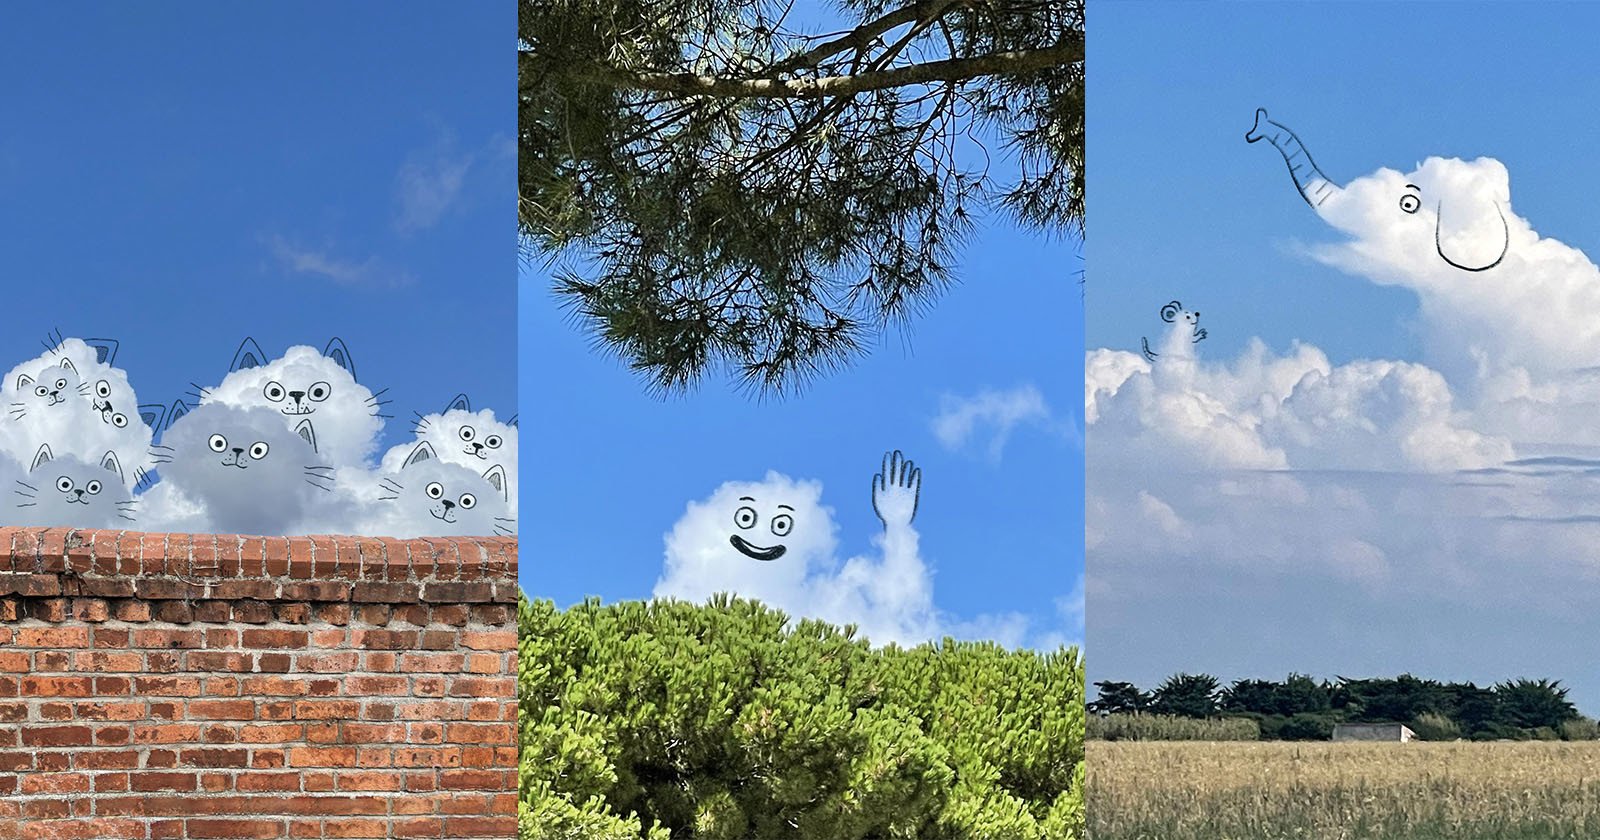 Imaginative Project Fuses Photography and Art to Create Cloud Characters